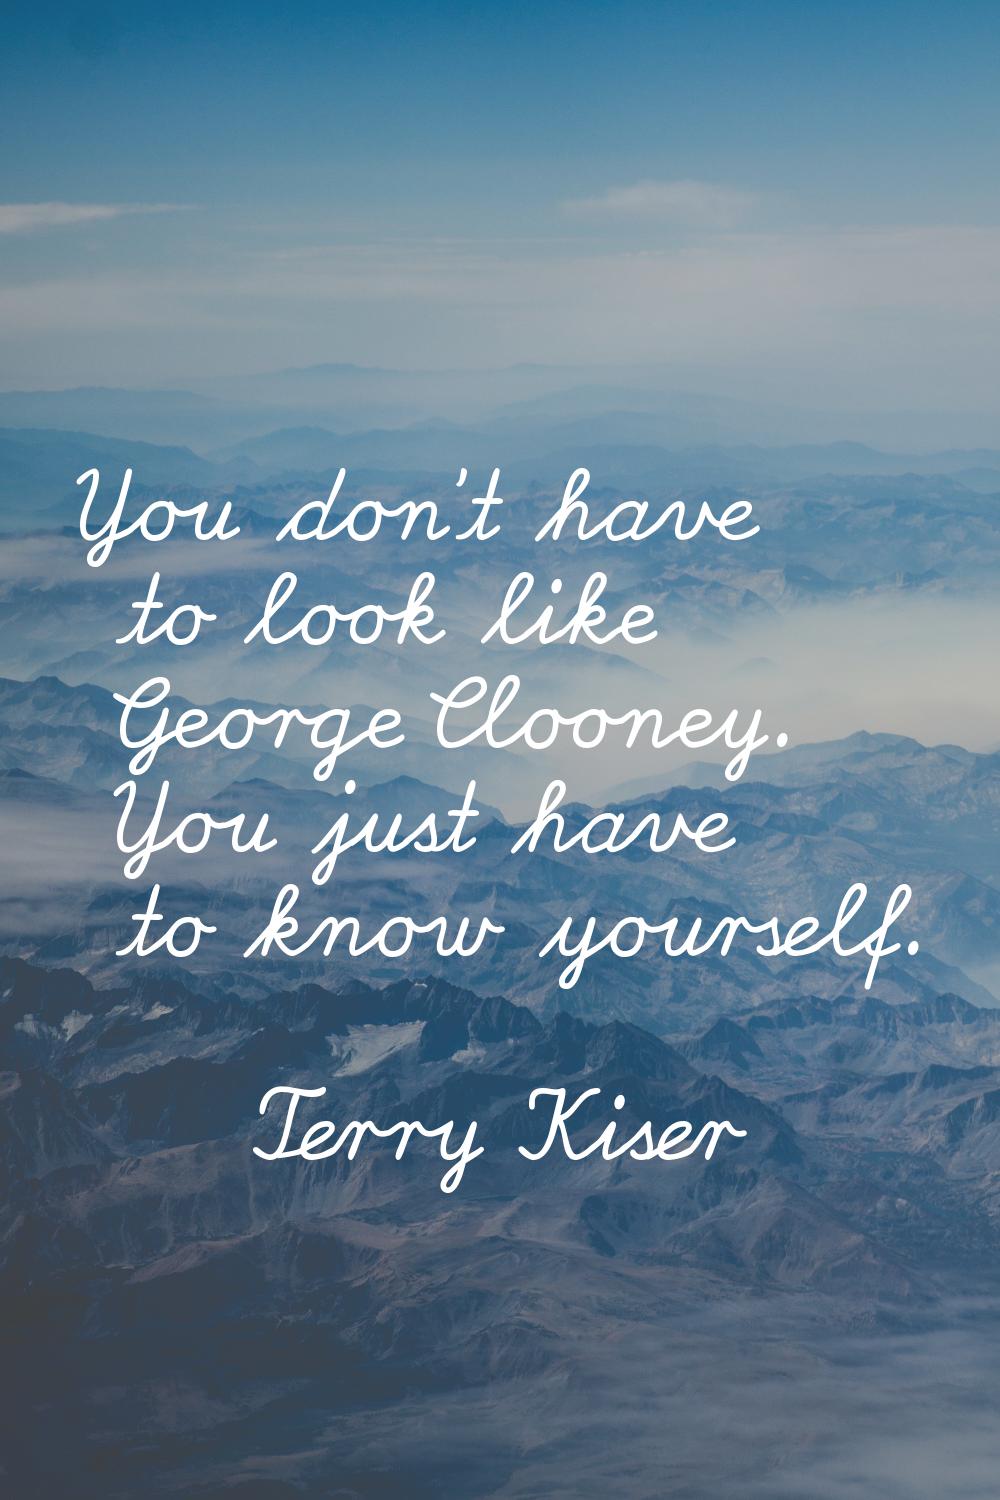 You don't have to look like George Clooney. You just have to know yourself.